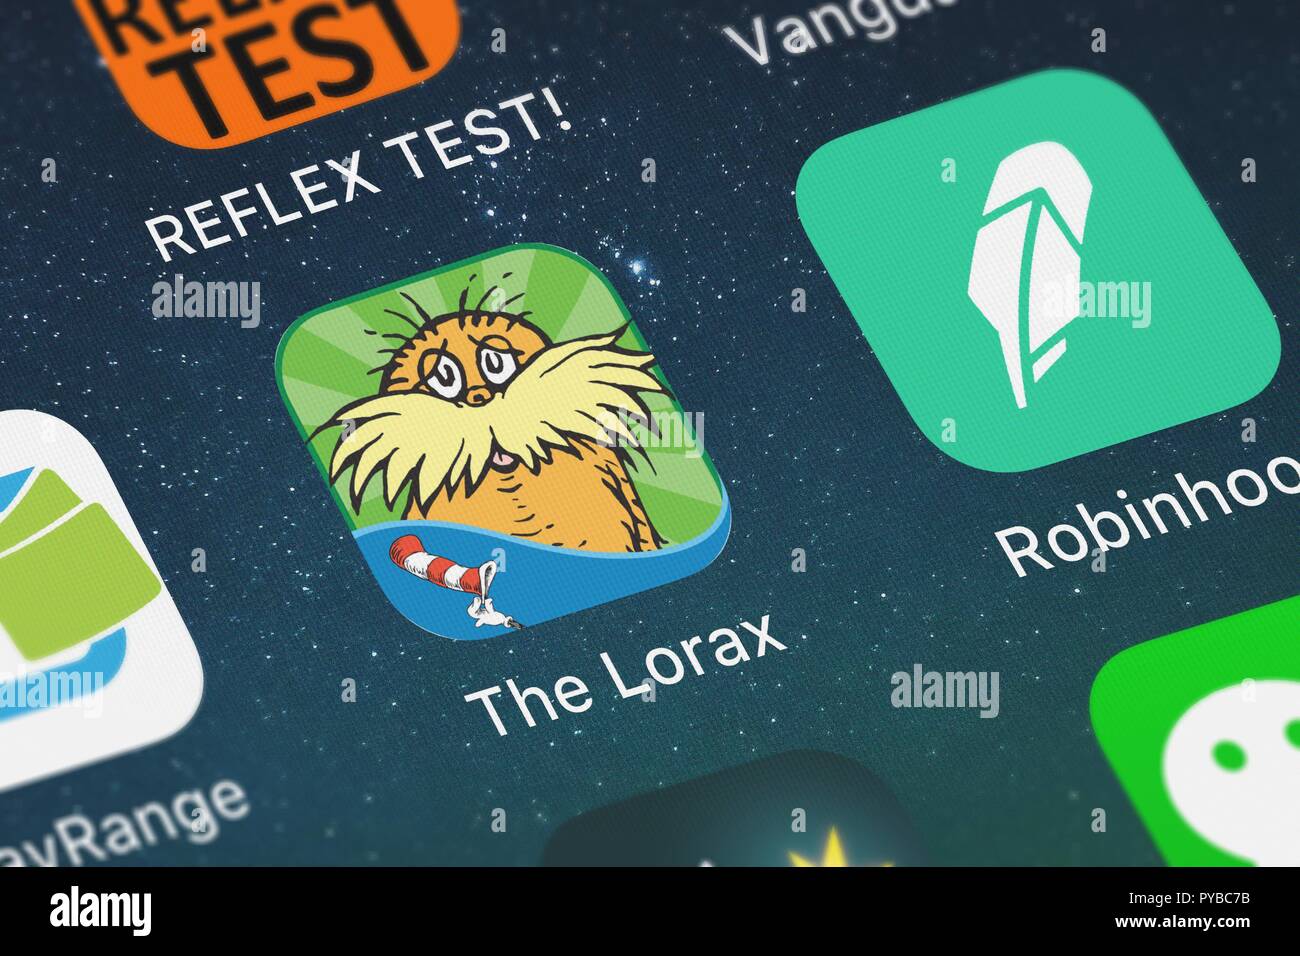 London, United Kingdom - October 26, 2018: Close-up of the The Lorax by Dr. Seuss icon from Oceanhouse Media on an iPhone. Stock Photo